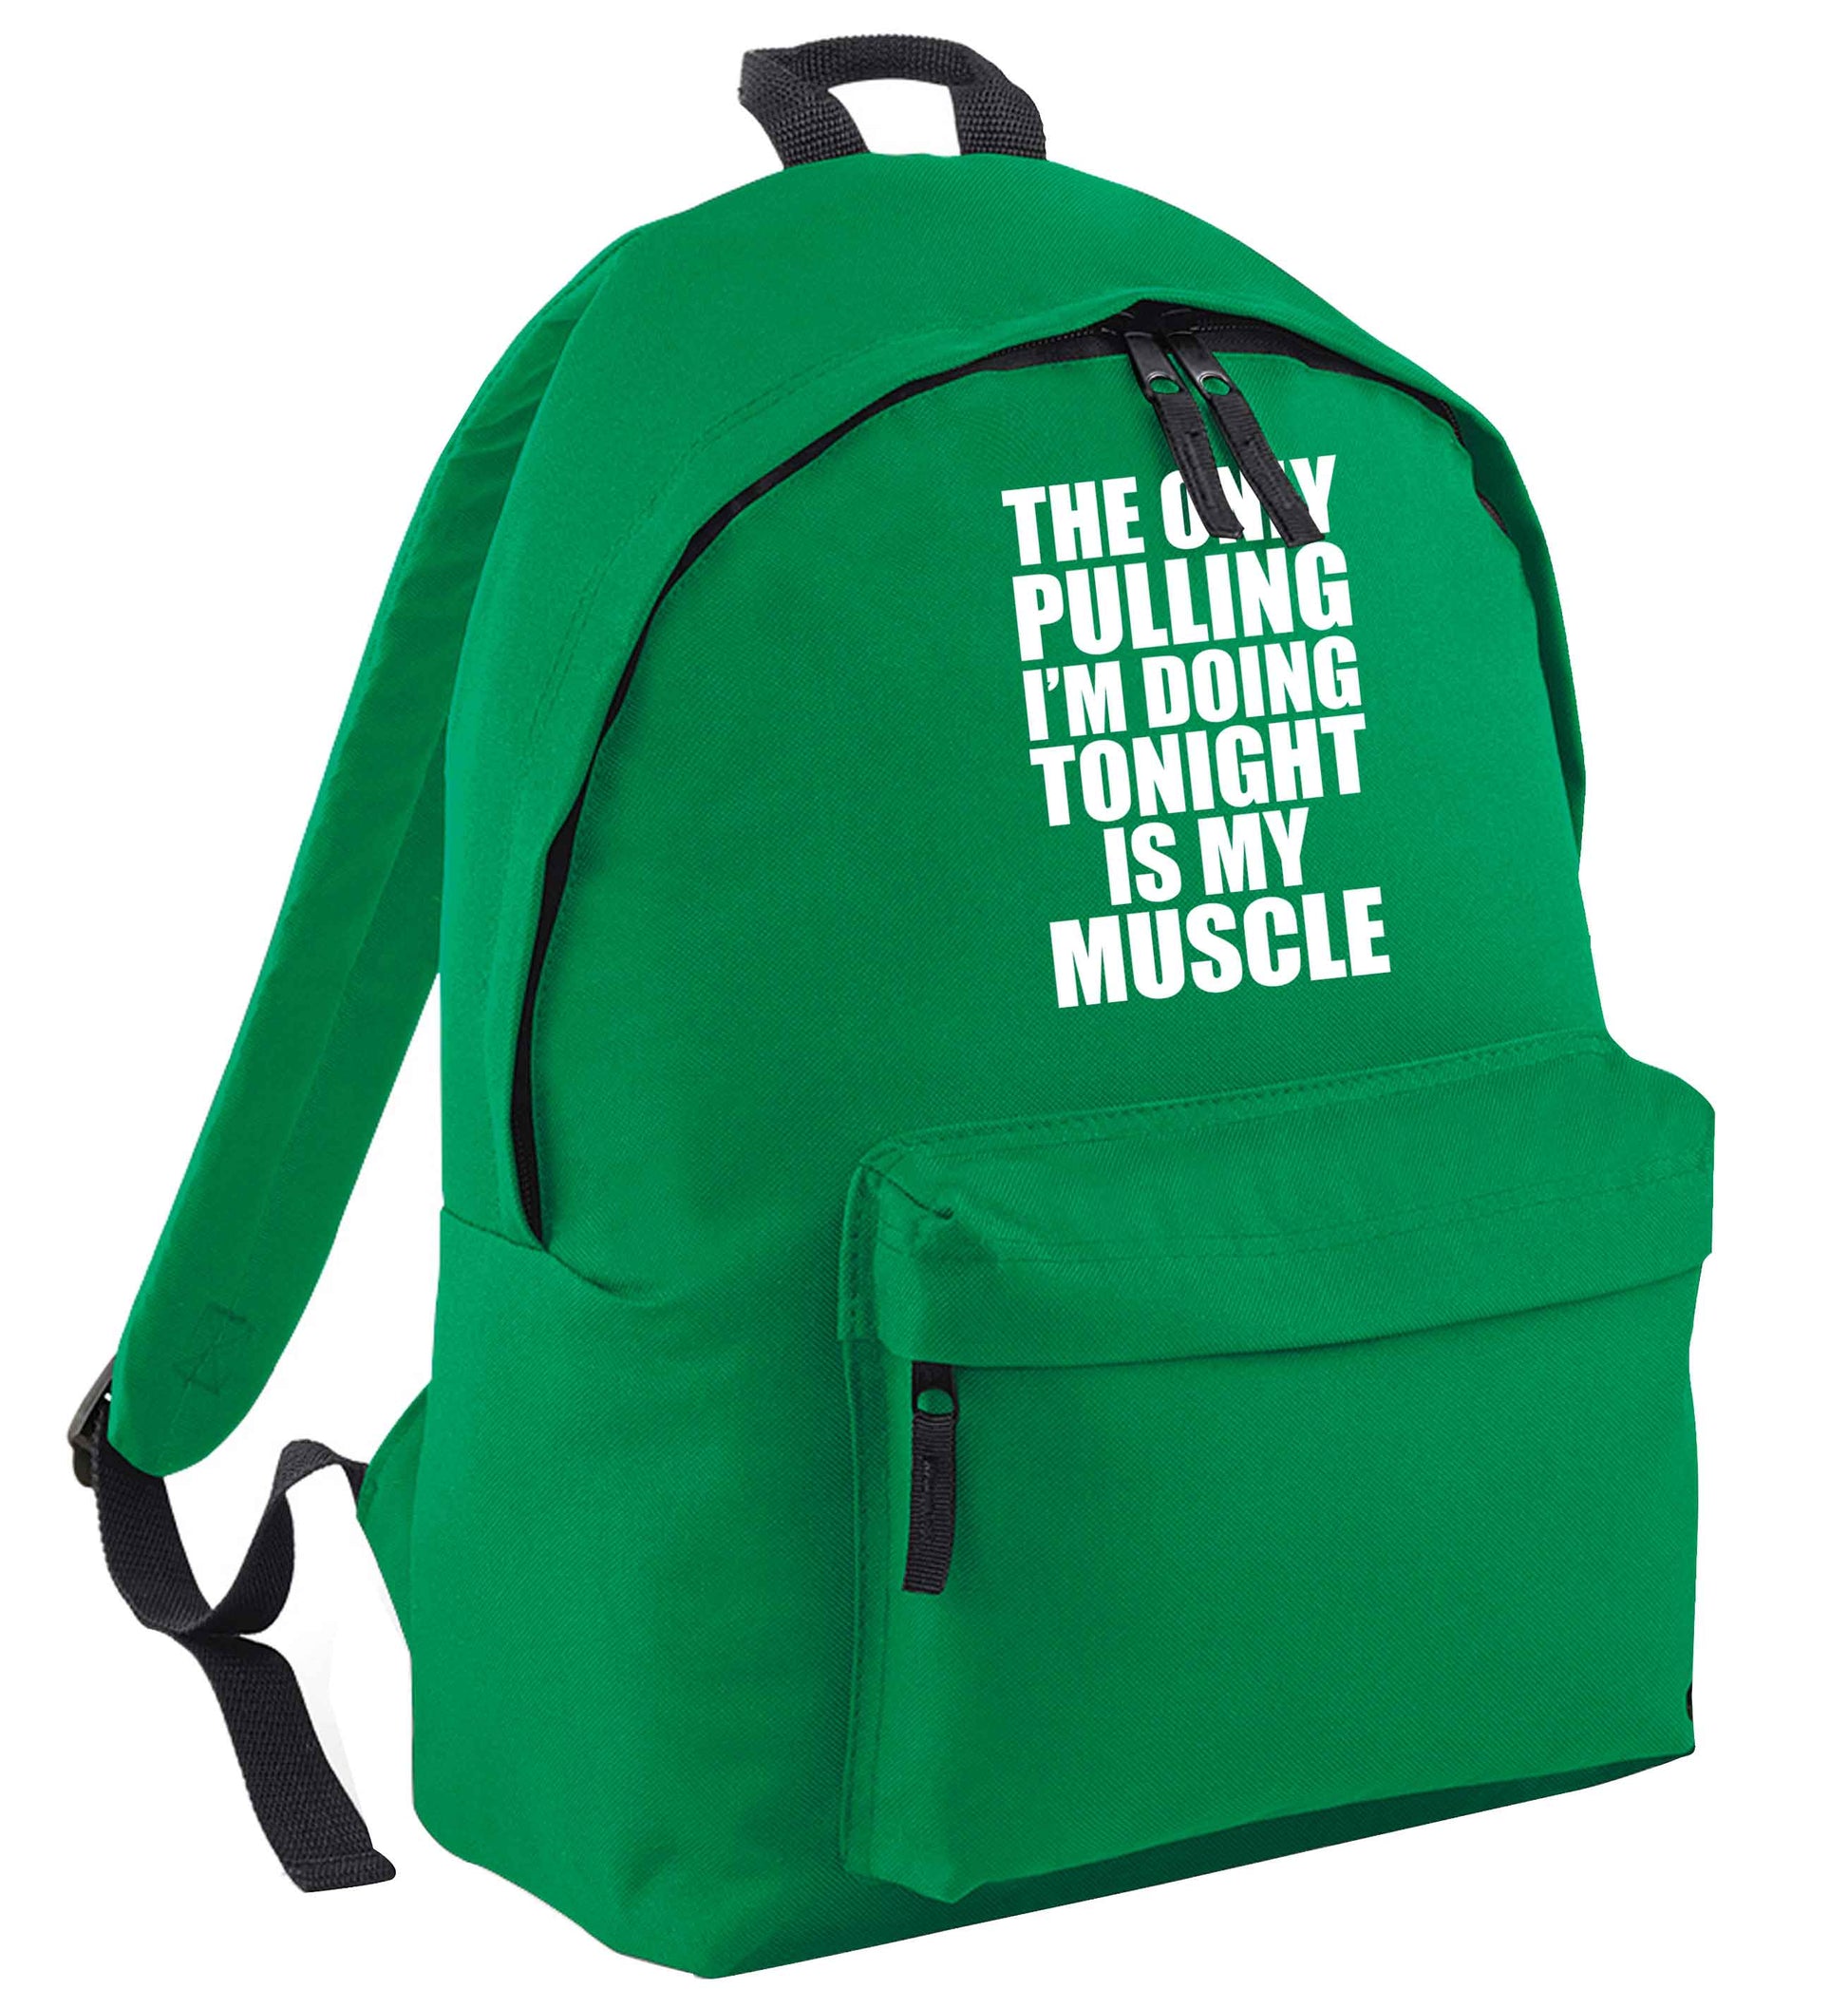 The only pulling I'm doing tonight is my muscle green adults backpack